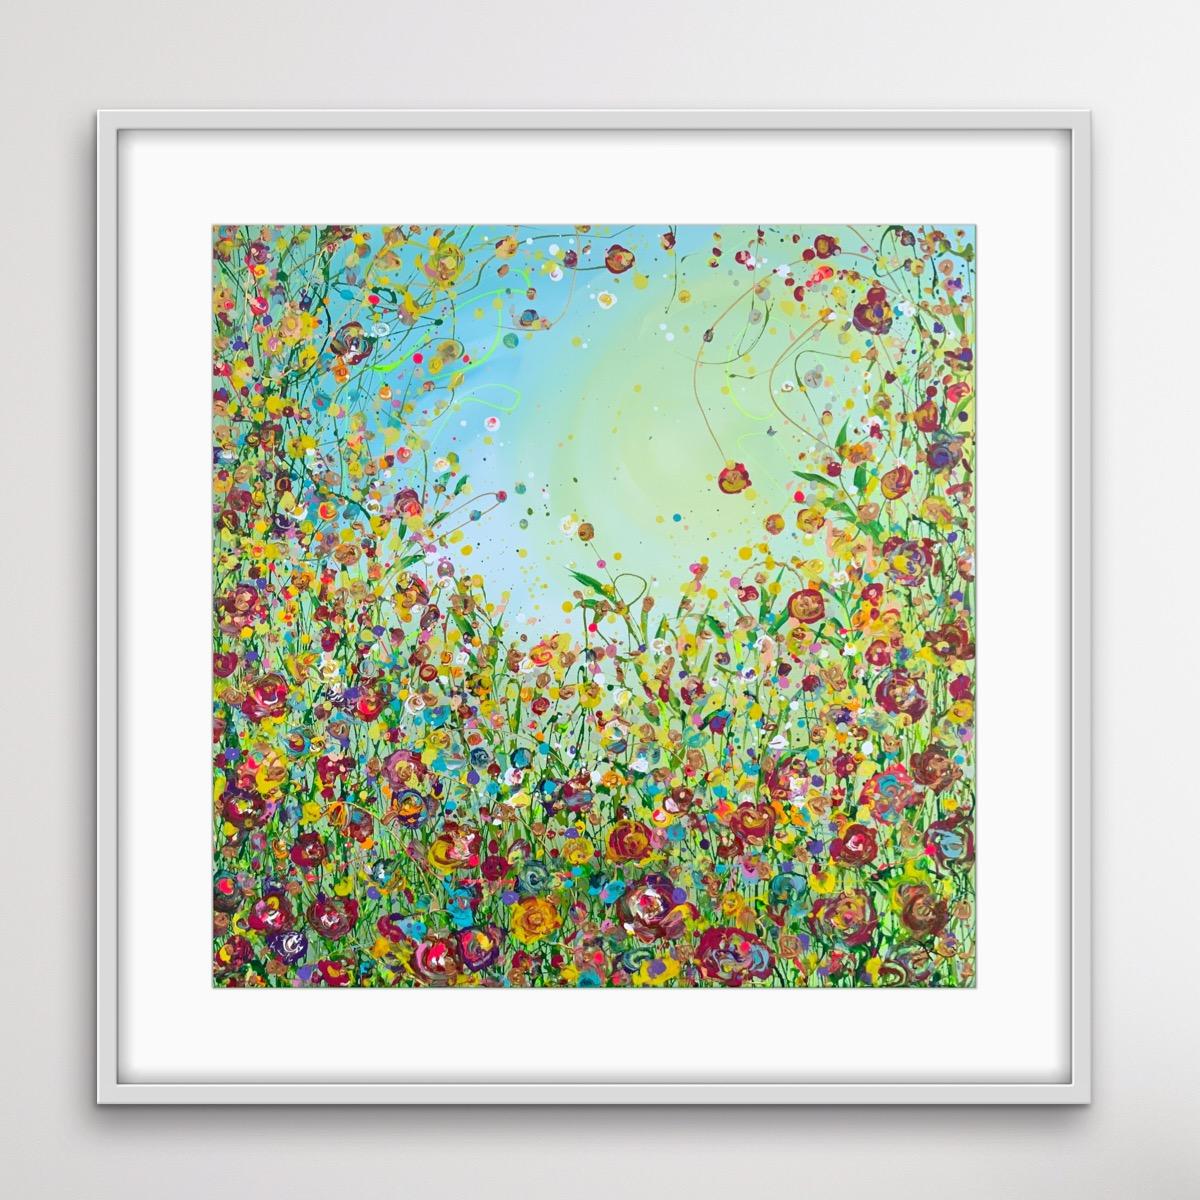 A colourful array of wild meadow flowers. Painted in an expressive and abstract style. Painted with energy and passion for the subject. Inspired by my love of colour, pattern and flowers. Painted using a professional quality stretched canvas using